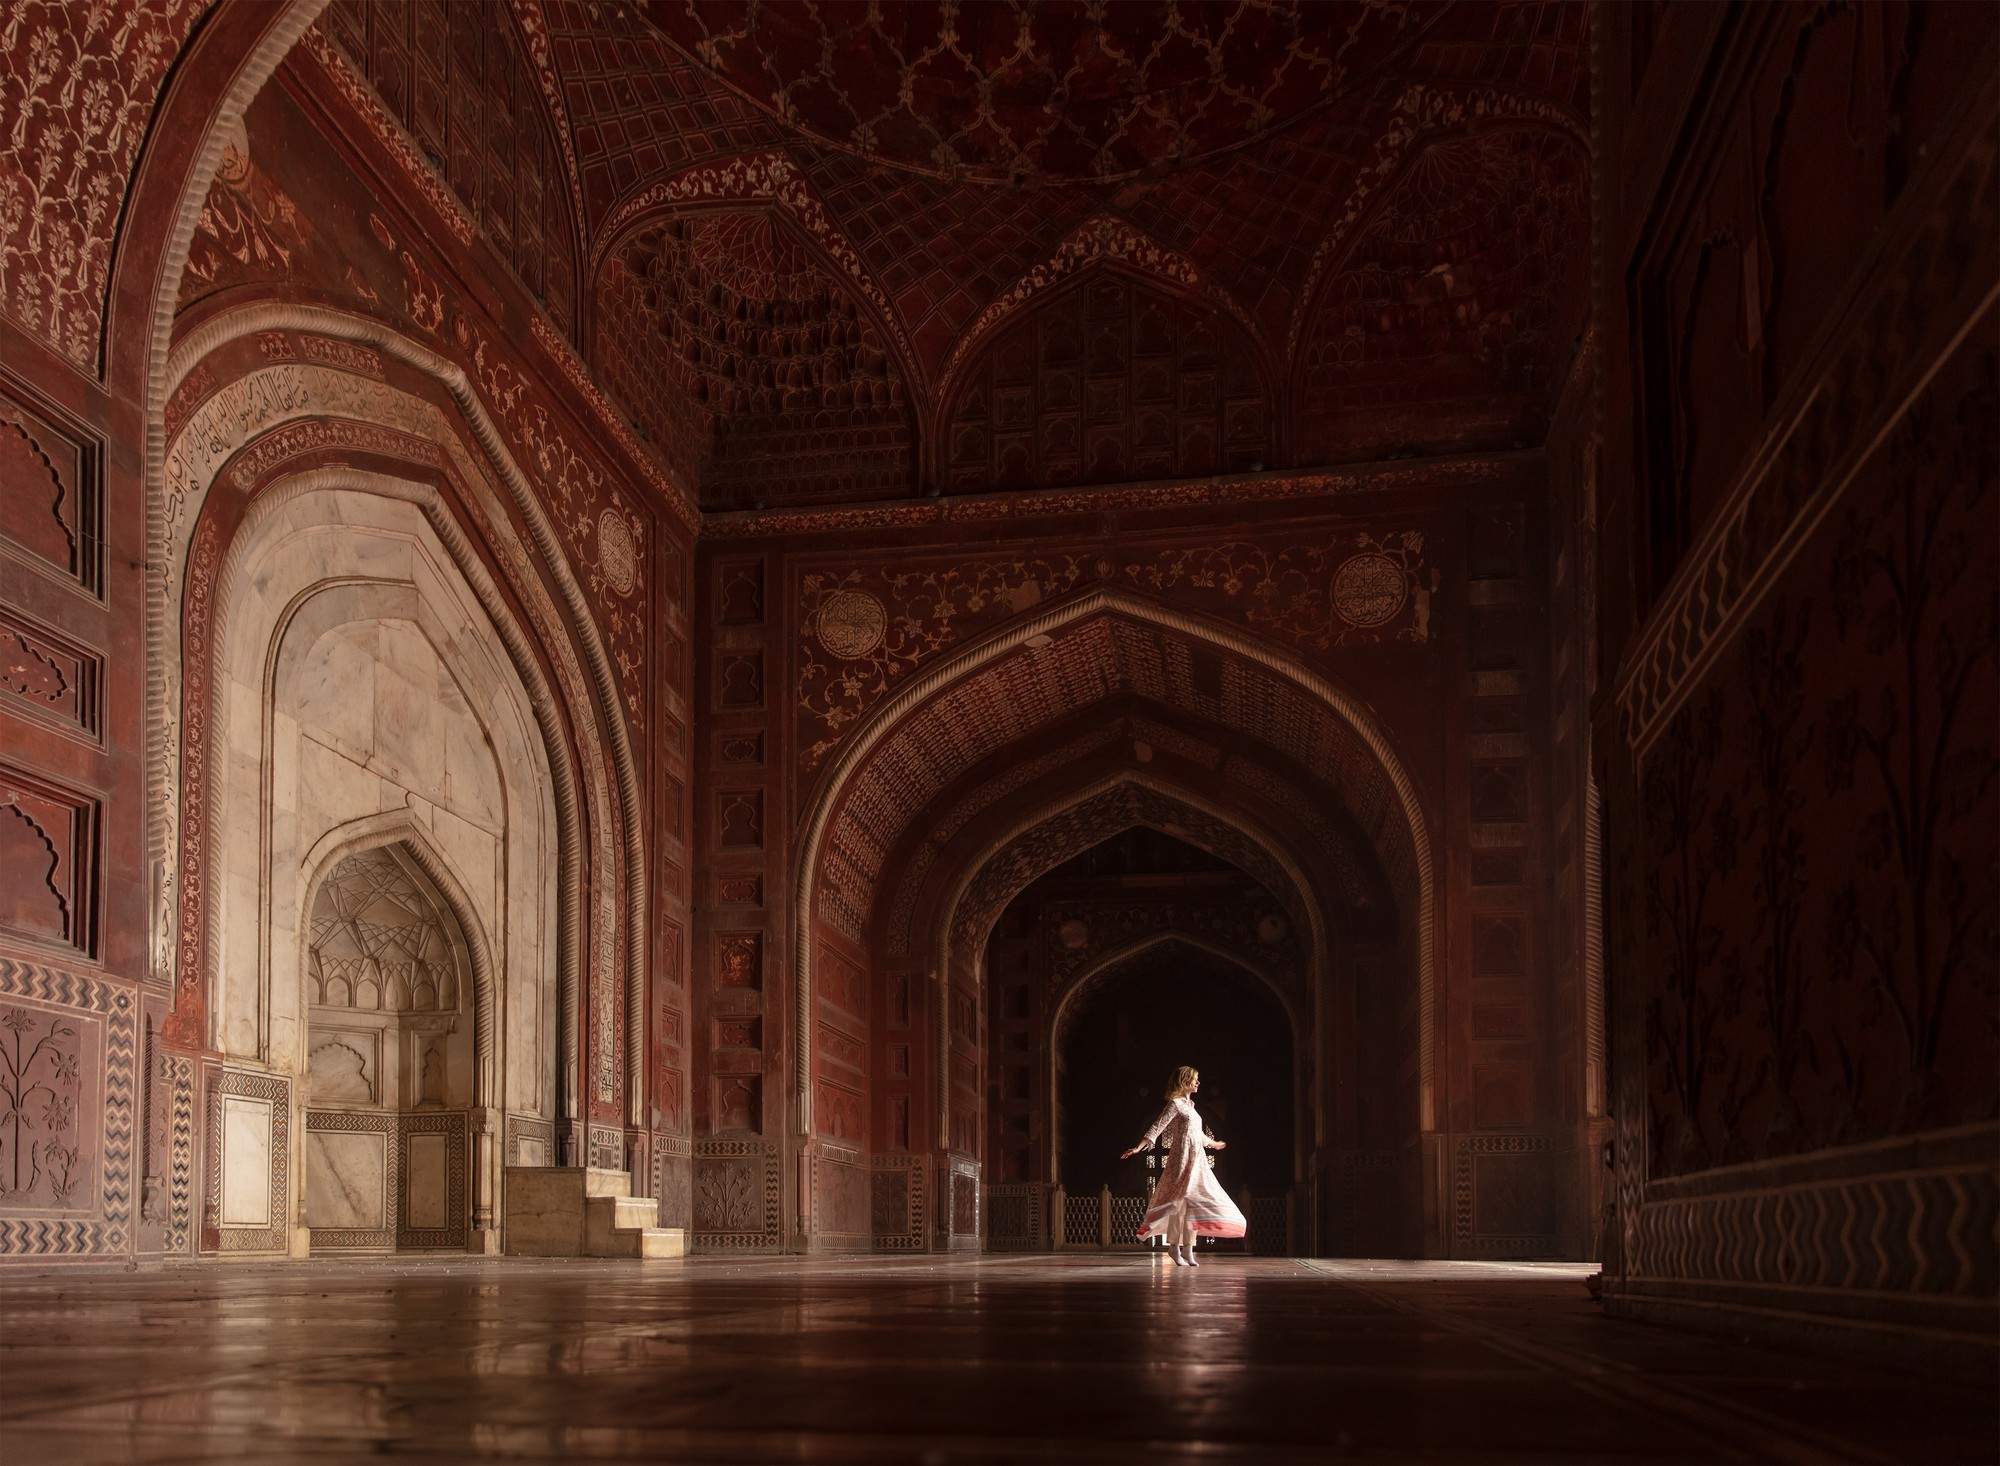 image of a dancing woman in the distance in a huge ballroom of an Indian palace